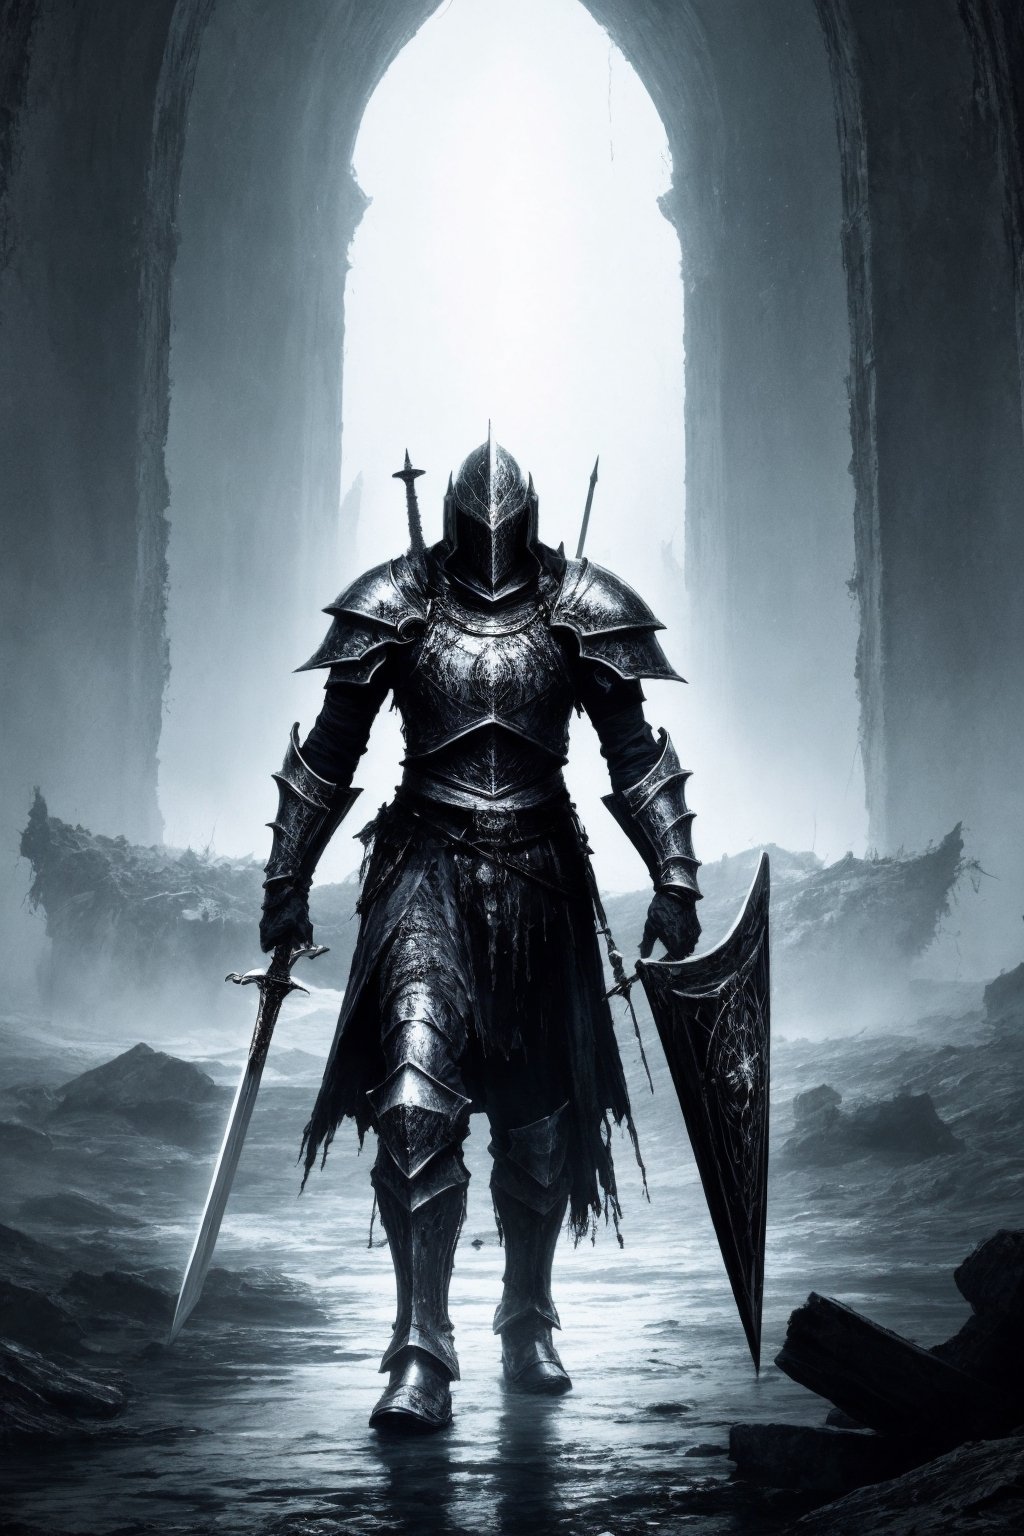 Dark fantasy themed image, Dark souls artstyle and scenary. A black knight wearing his armor with sword and shield entering a destroyed town. photorealistic, 4k, dark themed